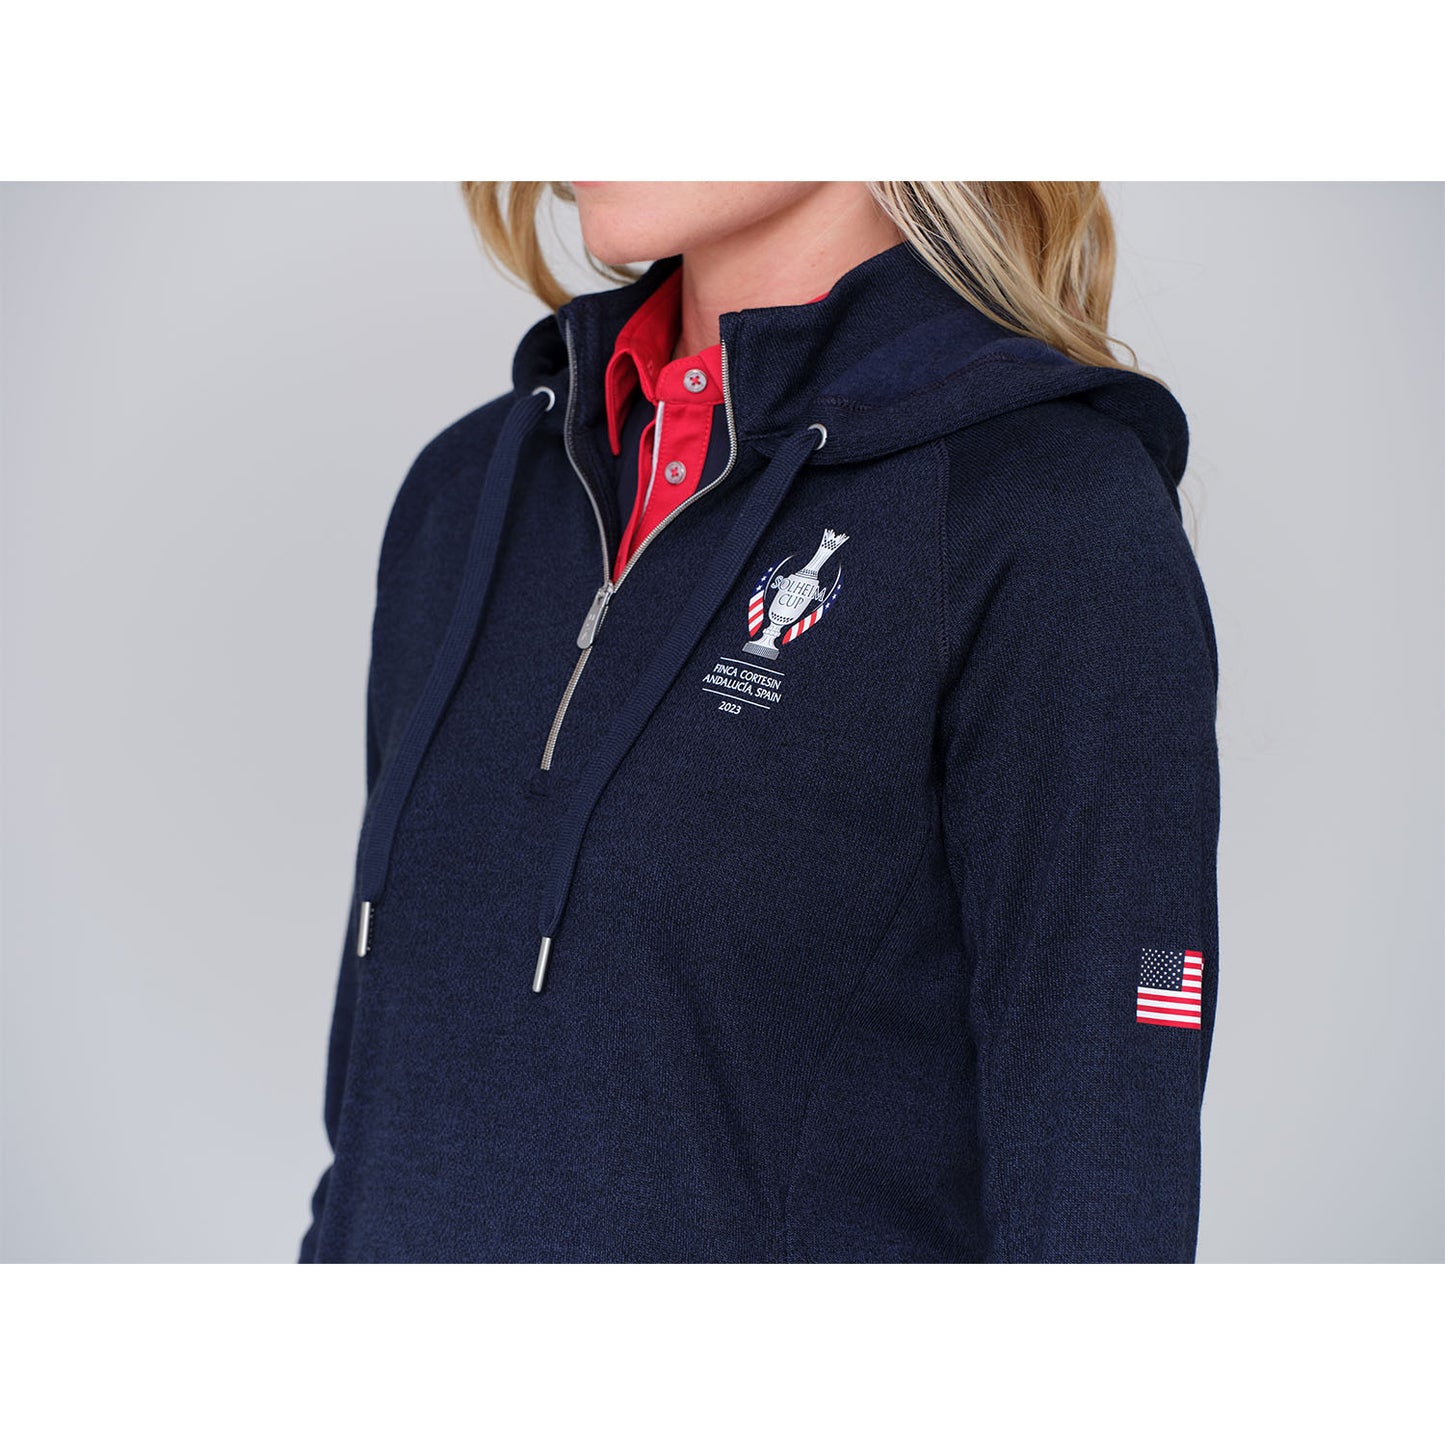 Dunning 2023 LPGA Official Solheim Cup Team Uniform Women's Quarter Zip Hoodie in Halo Heather - Lifestyle Zoomed in Angled Left Side View